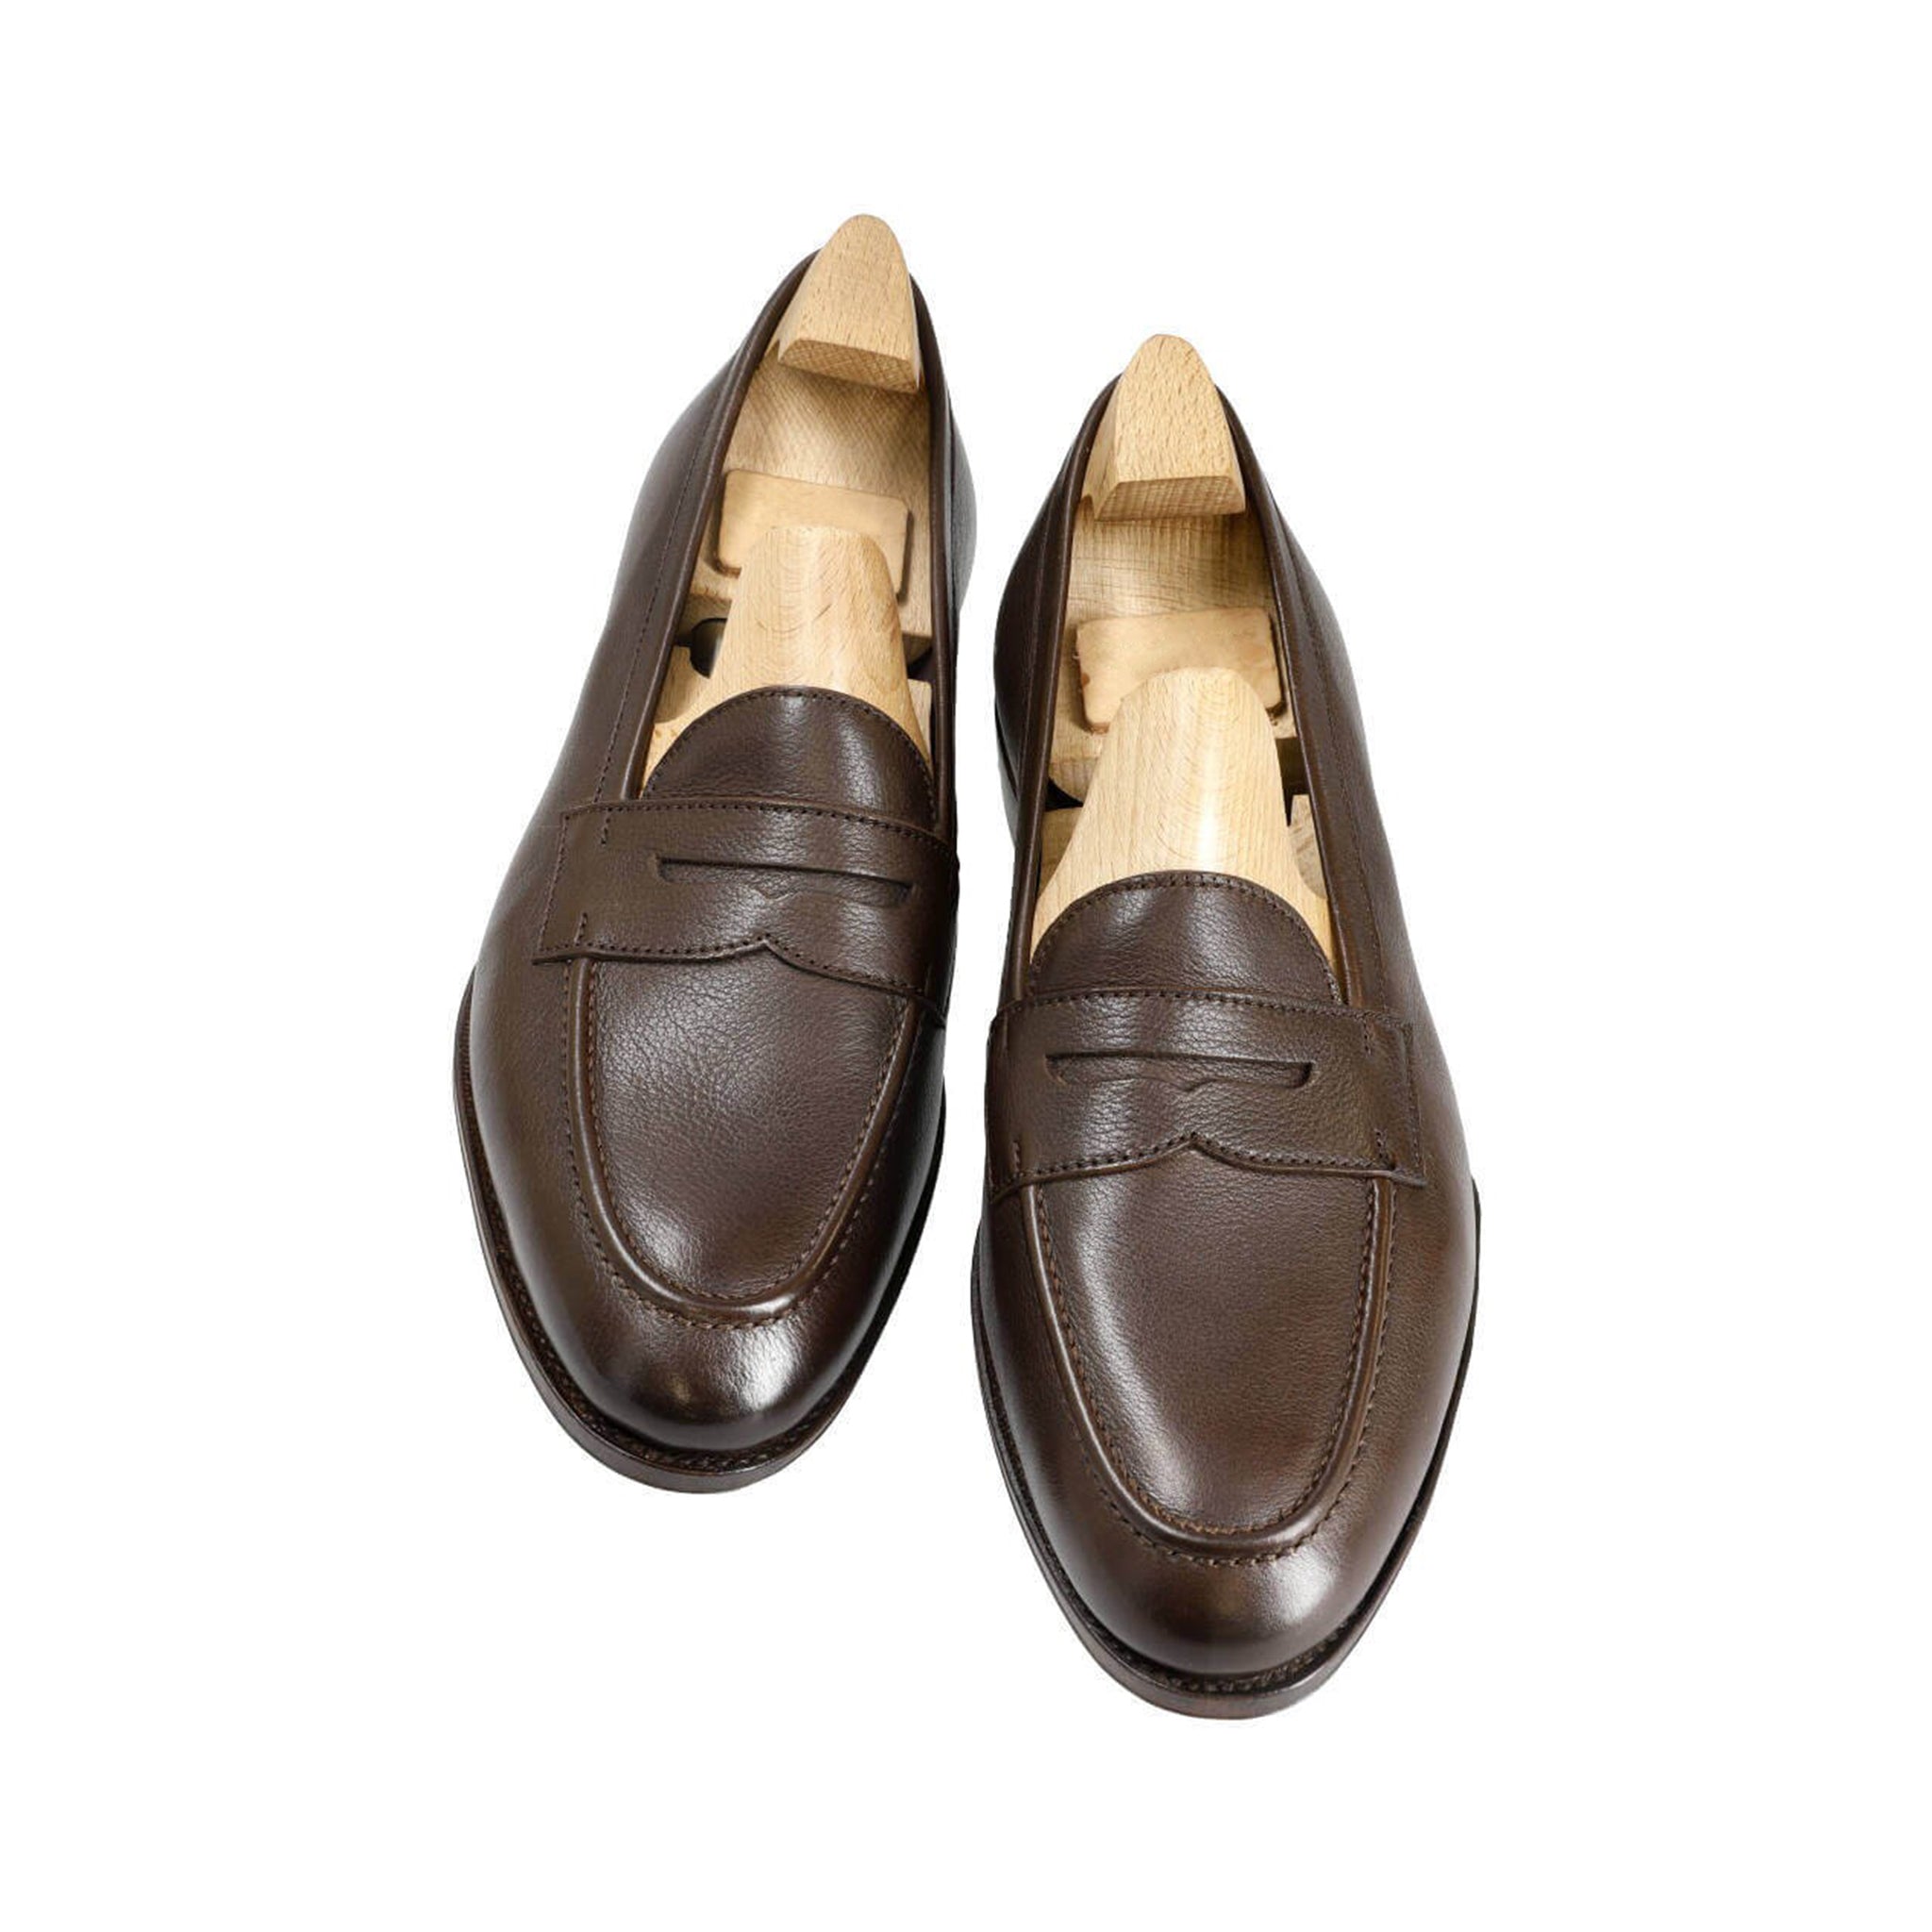 Rusticalf Cocoa Penny Loafers